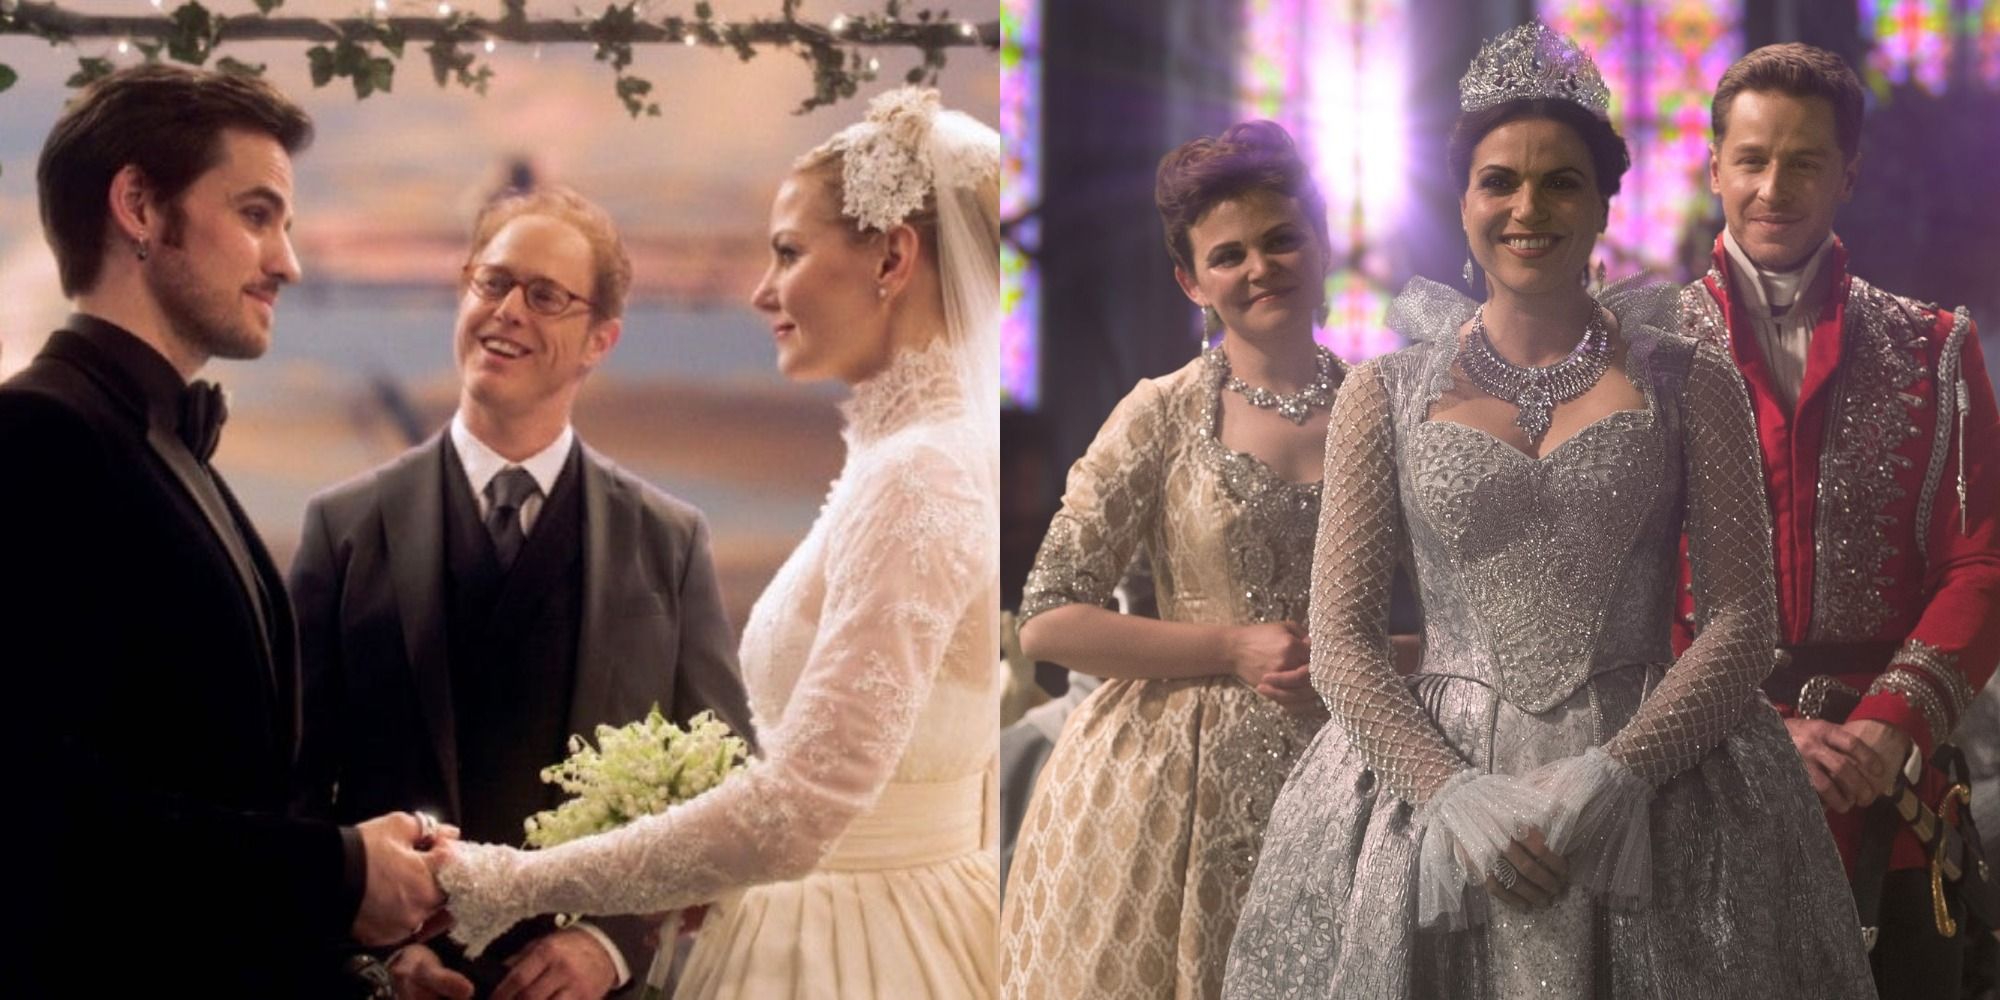 A Once Upon A Time split image of Emma and Hook's wedding and Regina being crowned queen of all the realms